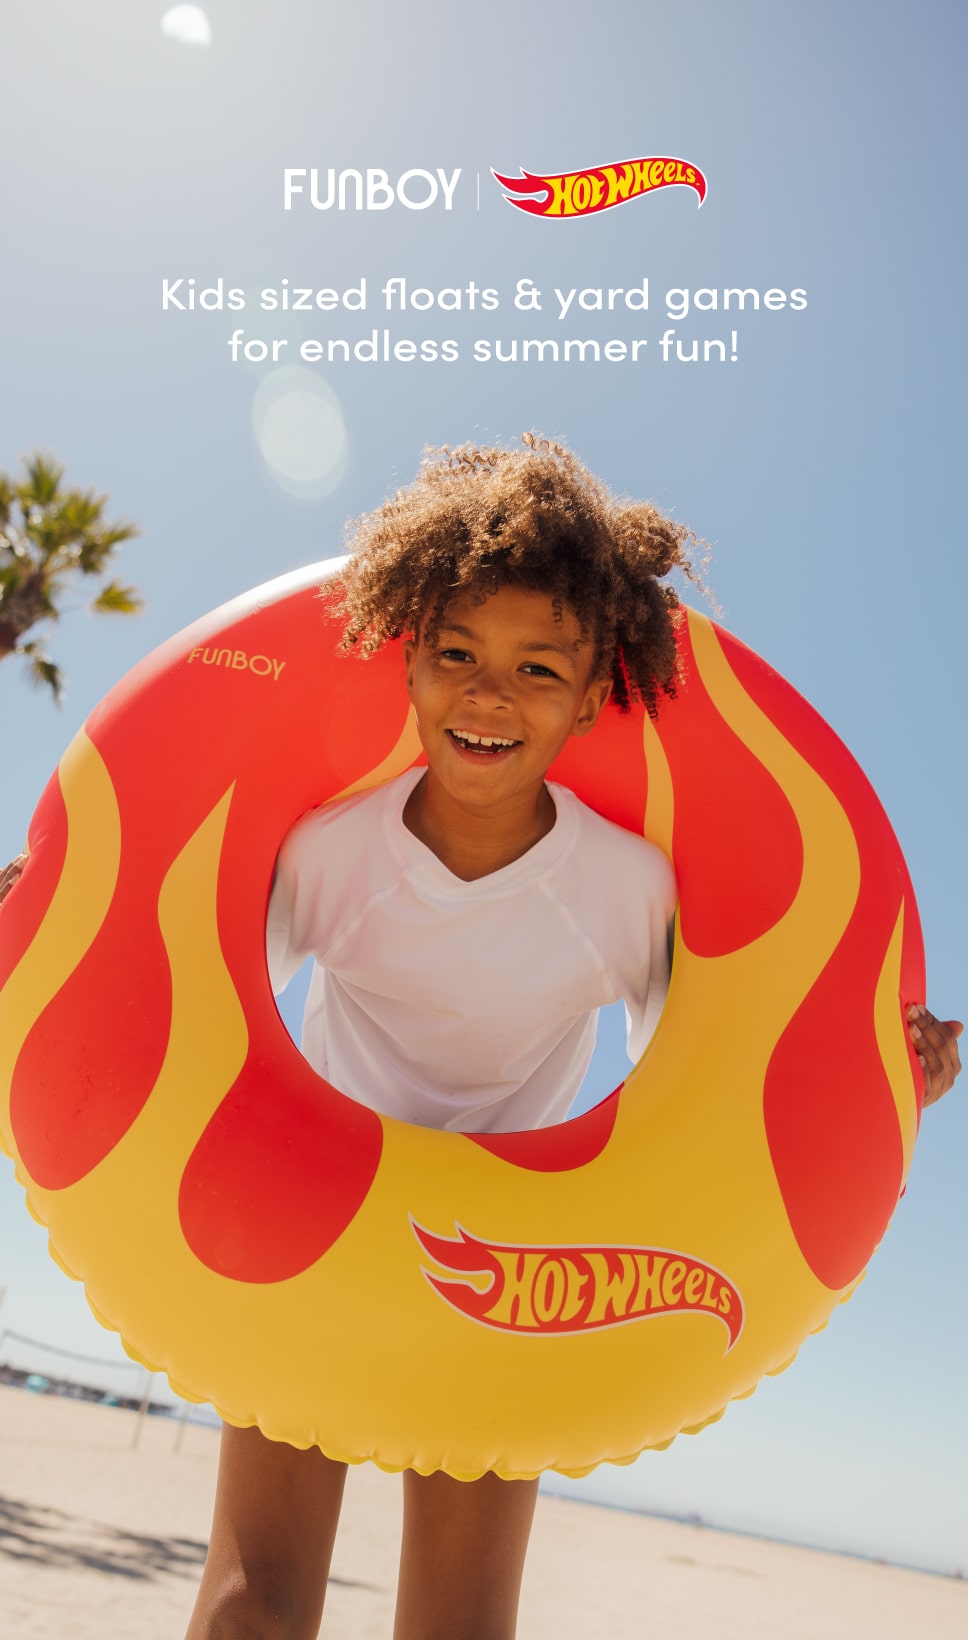 FUNBOY X Hot Wheels. Kids sized floats & yard games for endless summer fun